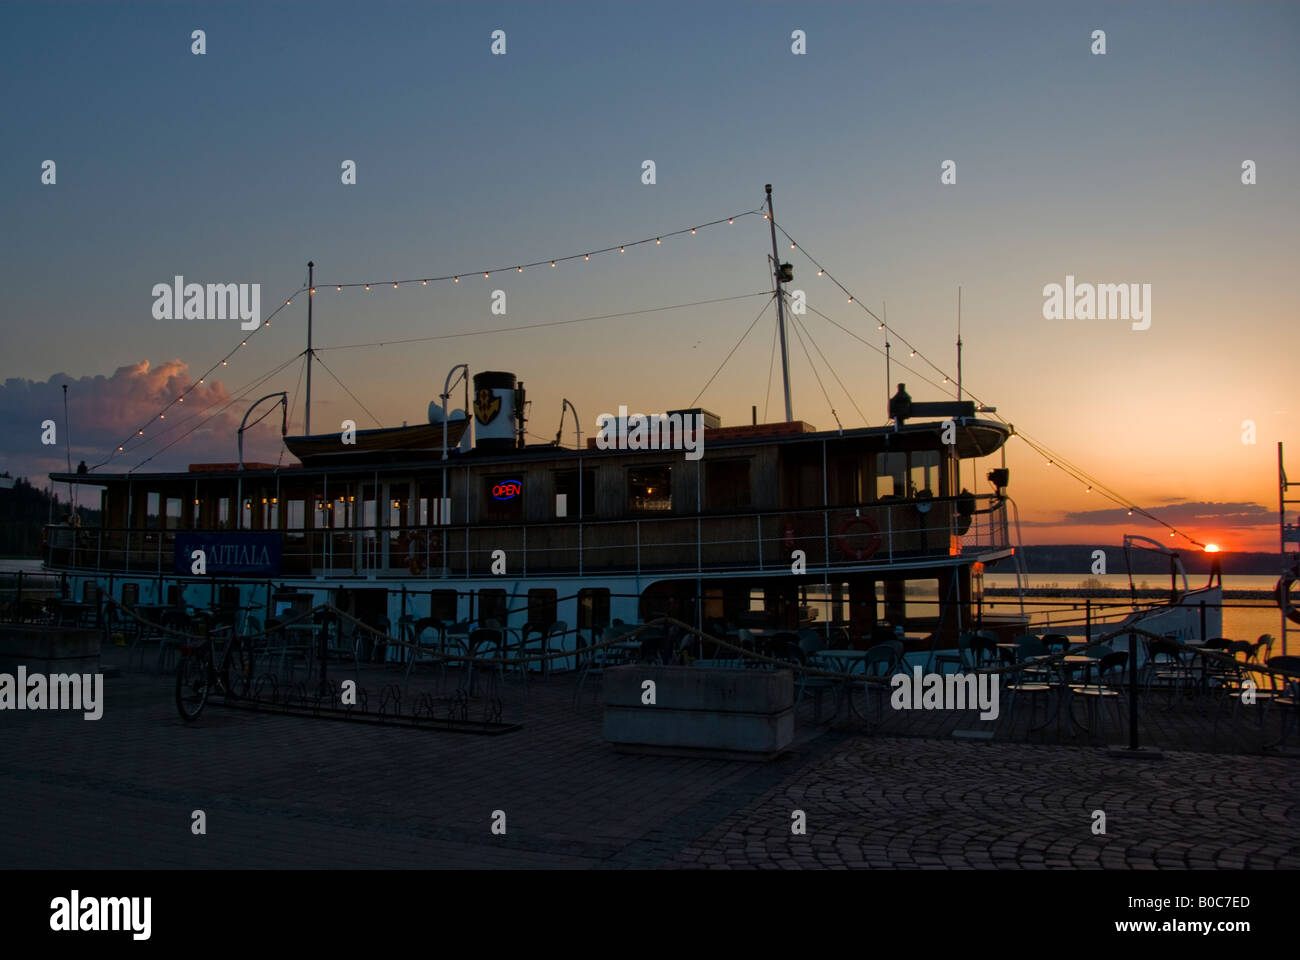 A boat at a pier at dusk with sun setting in the background Stock Photo